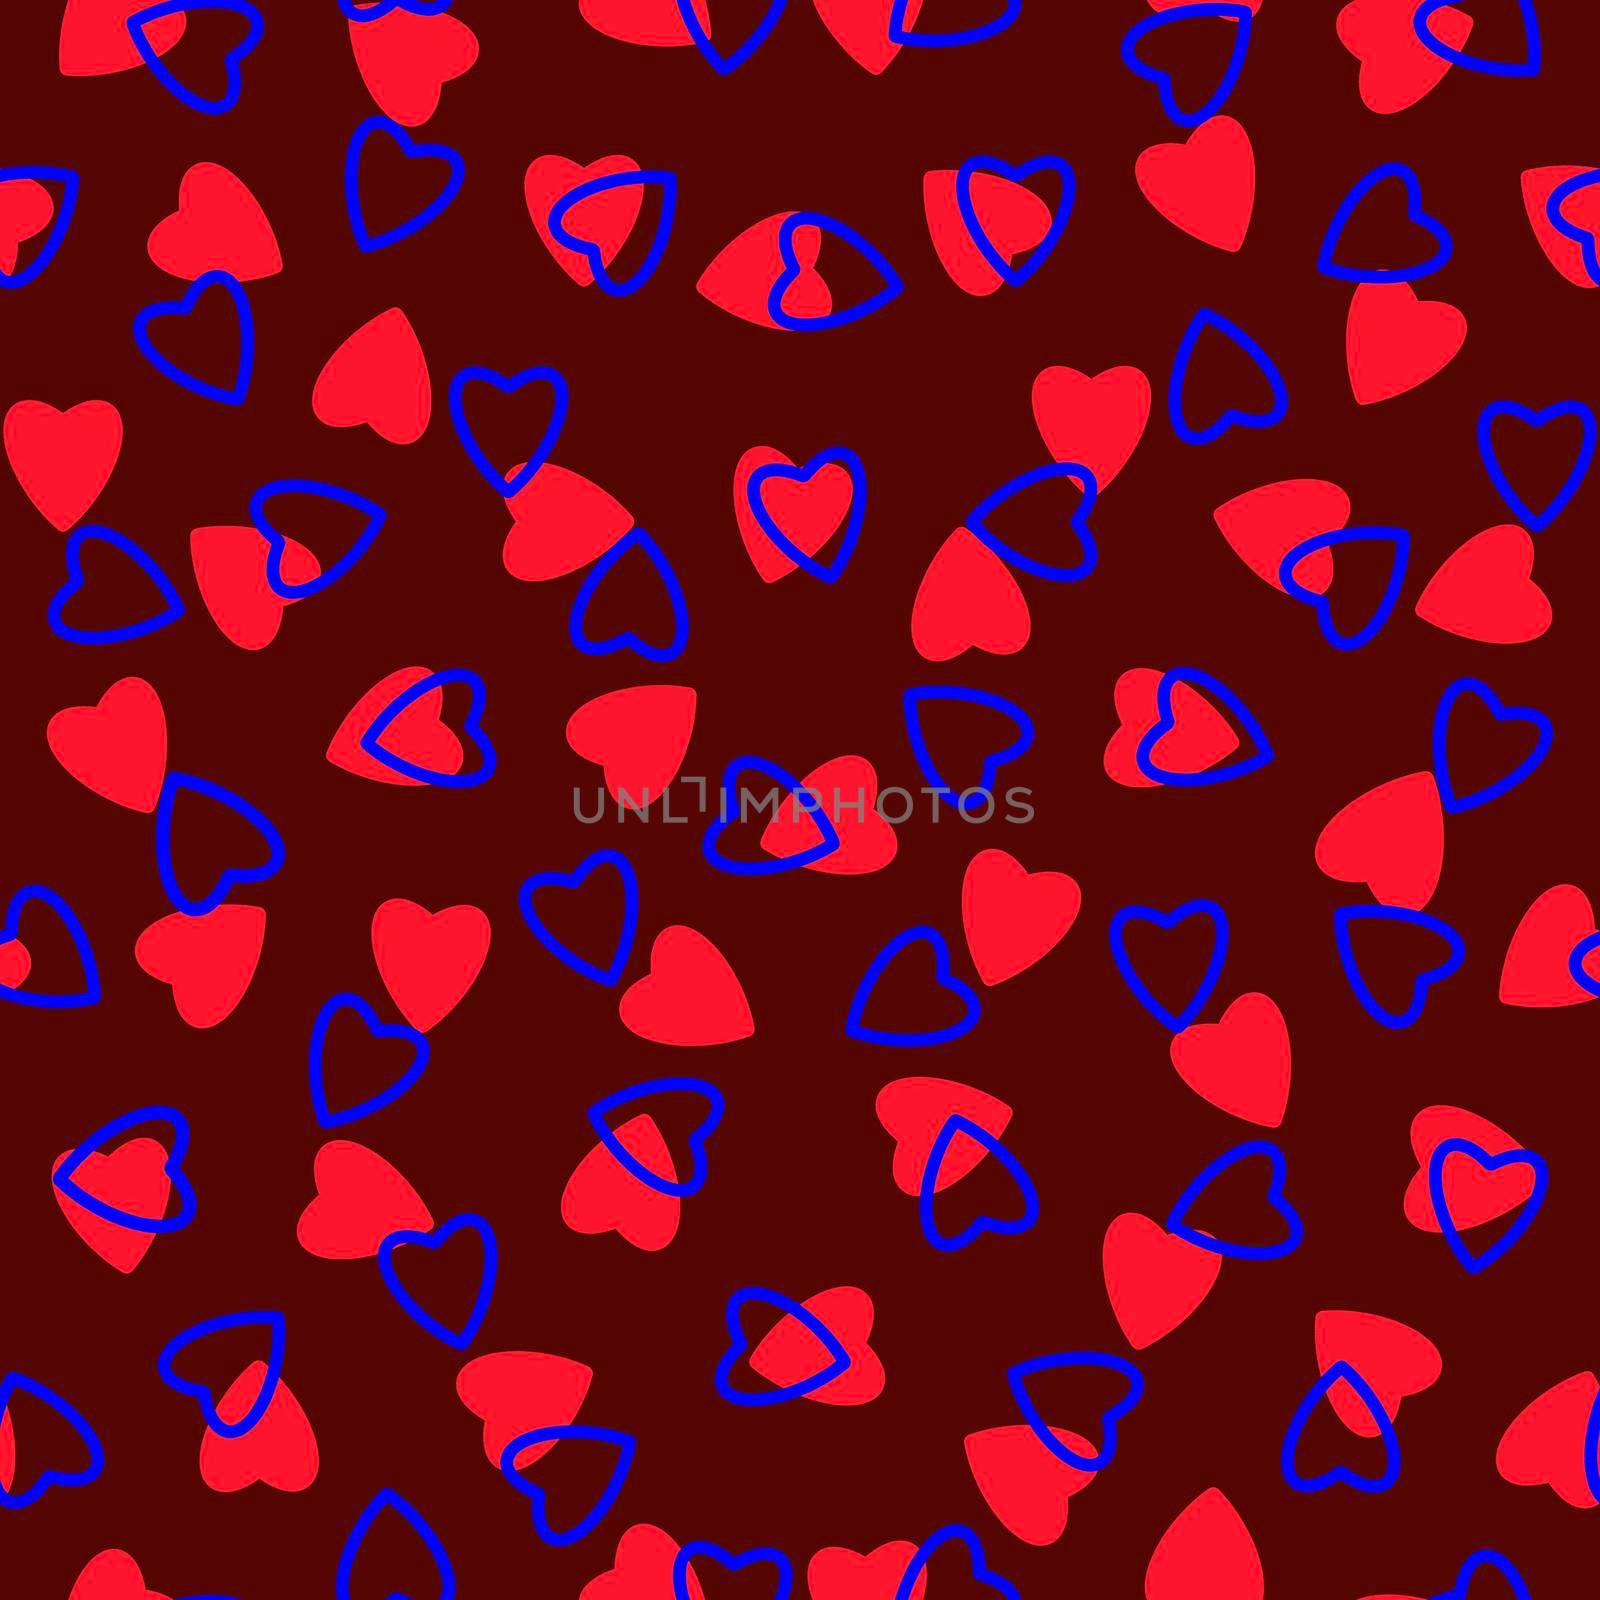 Simple heart seamless pattern,endless chaotic texture made of tiny heart silhouettes.Valentines,mothers day background.Red,blue,burgundy.Great for Easter,wedding,scrapbook,gift wrapping paper,textiles